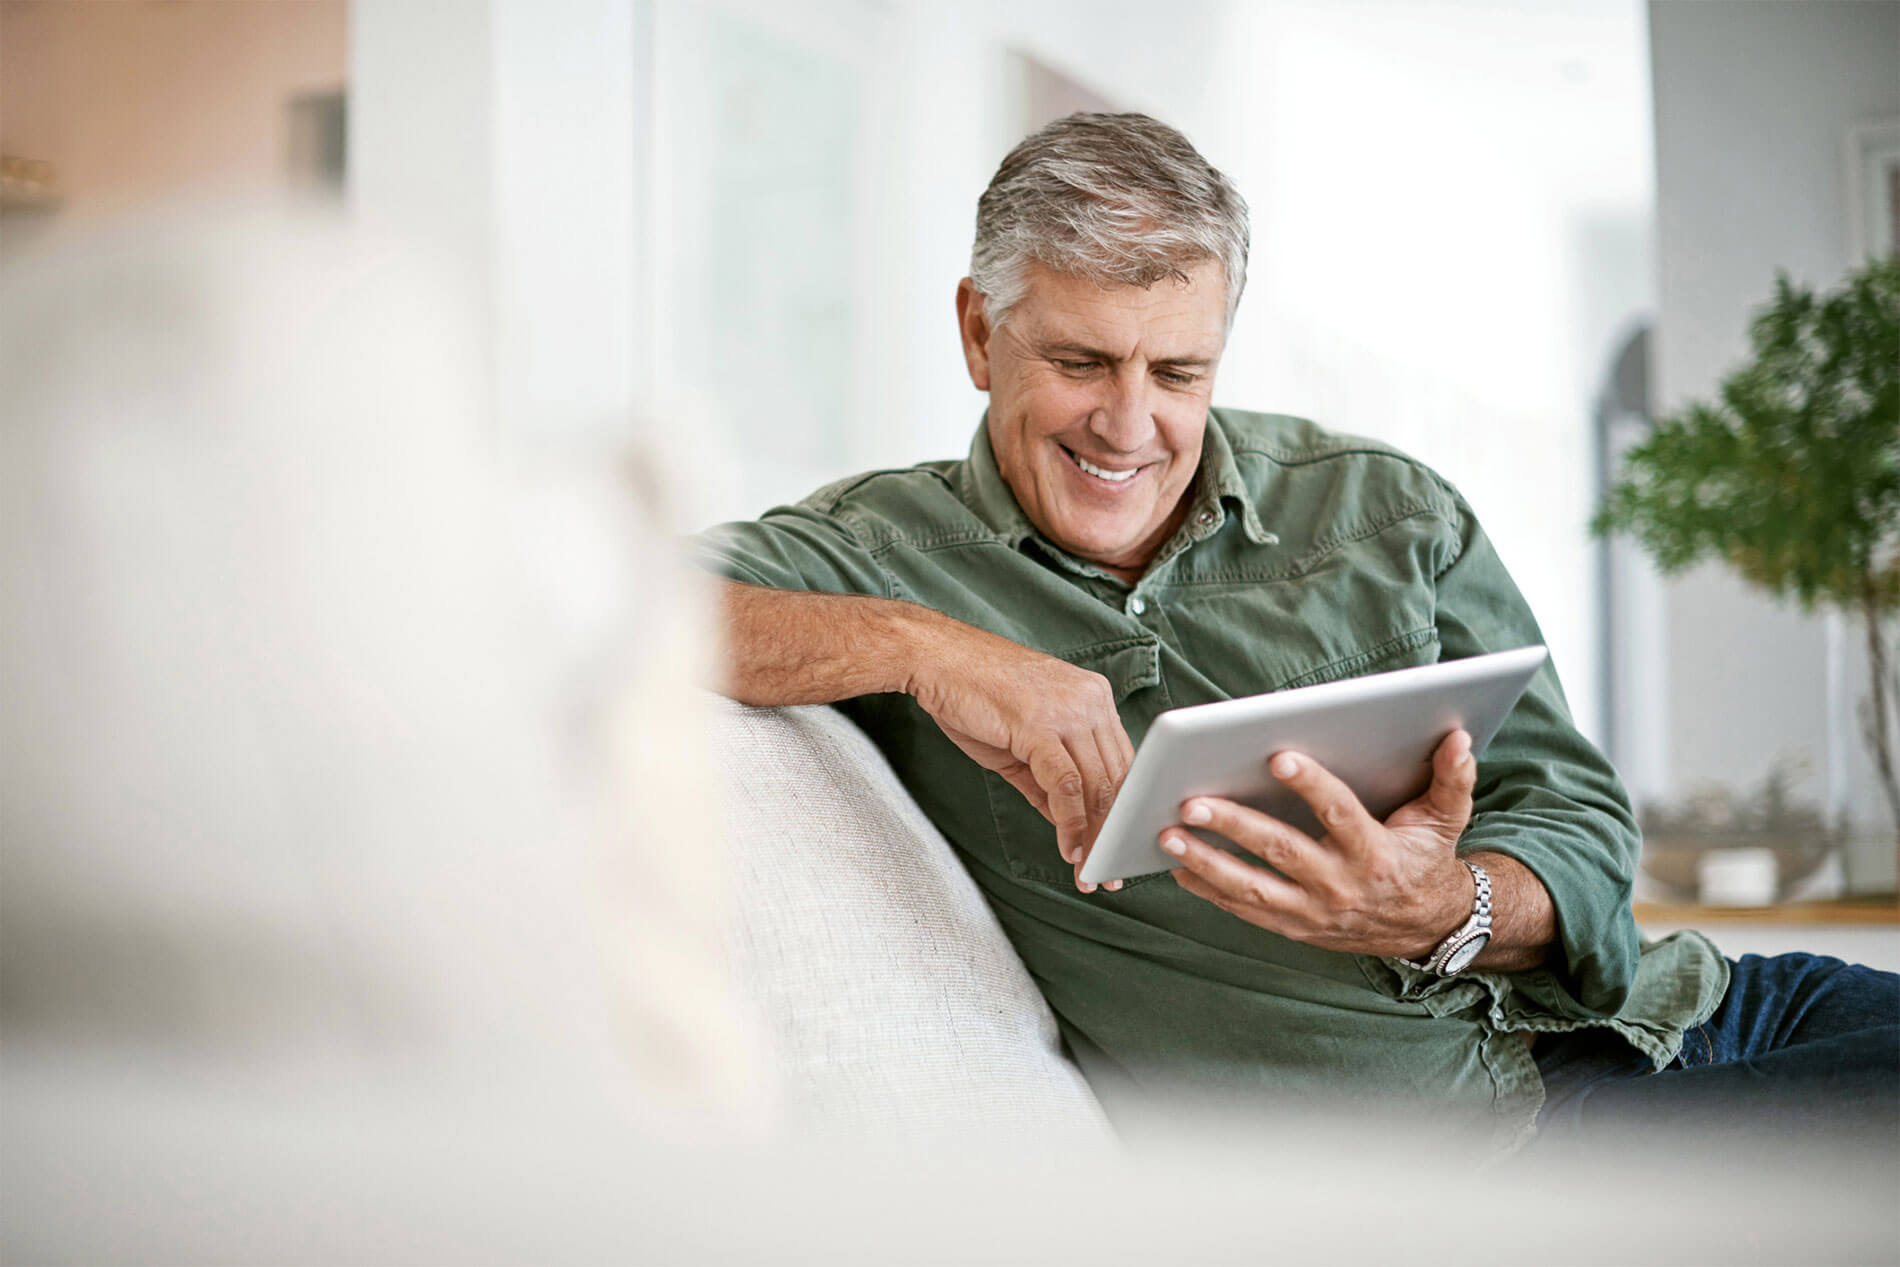 Mature man looking at a tablet while relaxing on the couch